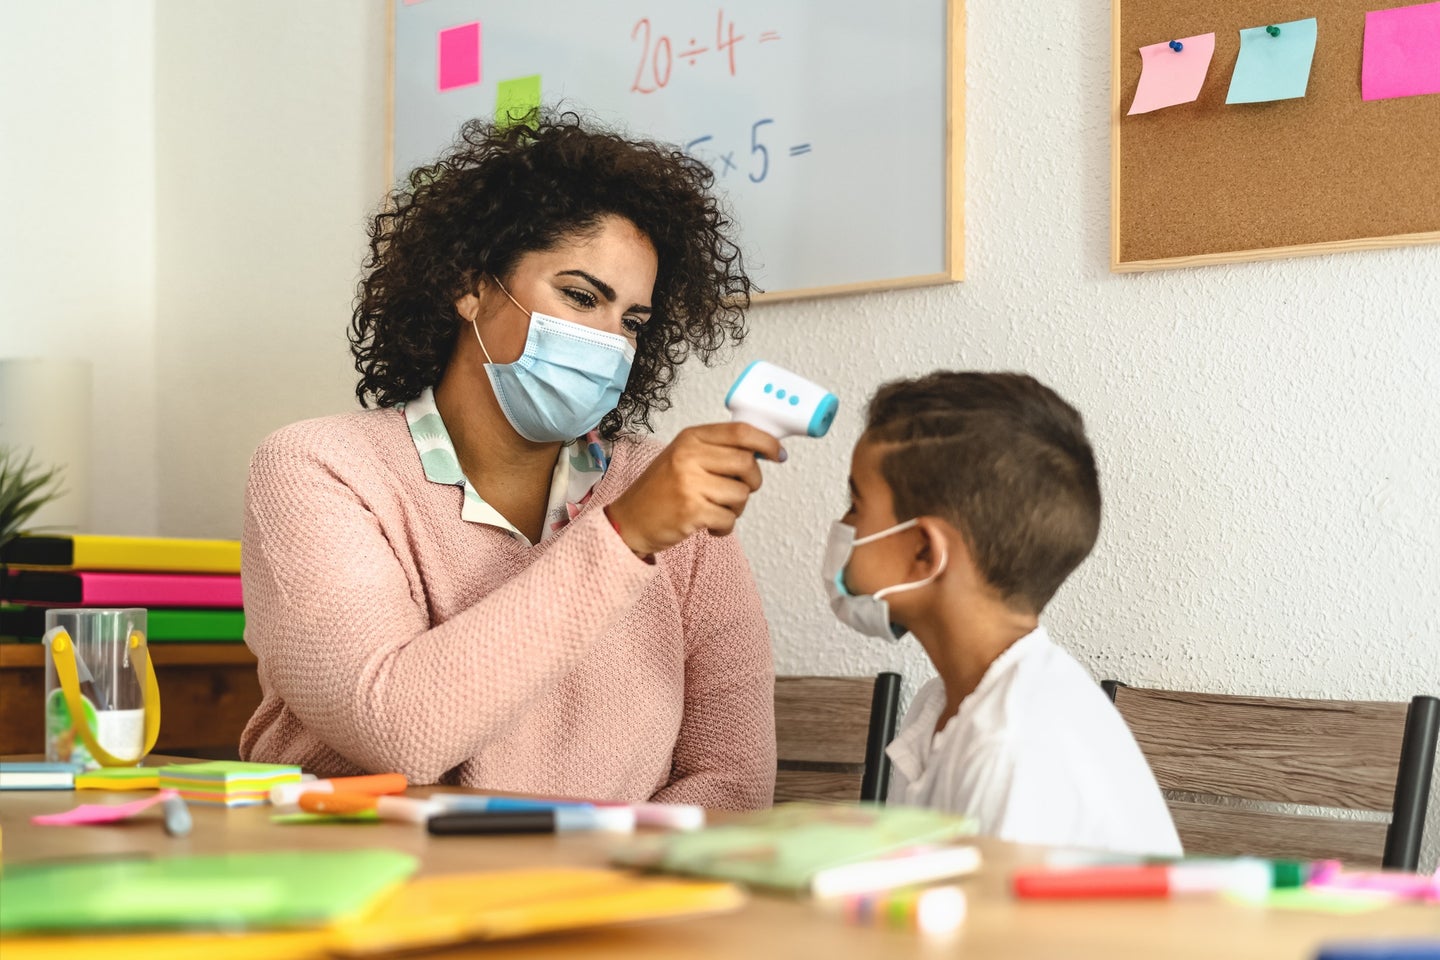 Daycare teacher in a surgical mask checking the temperature of a young kid in a surgical mask as a COVID precaution